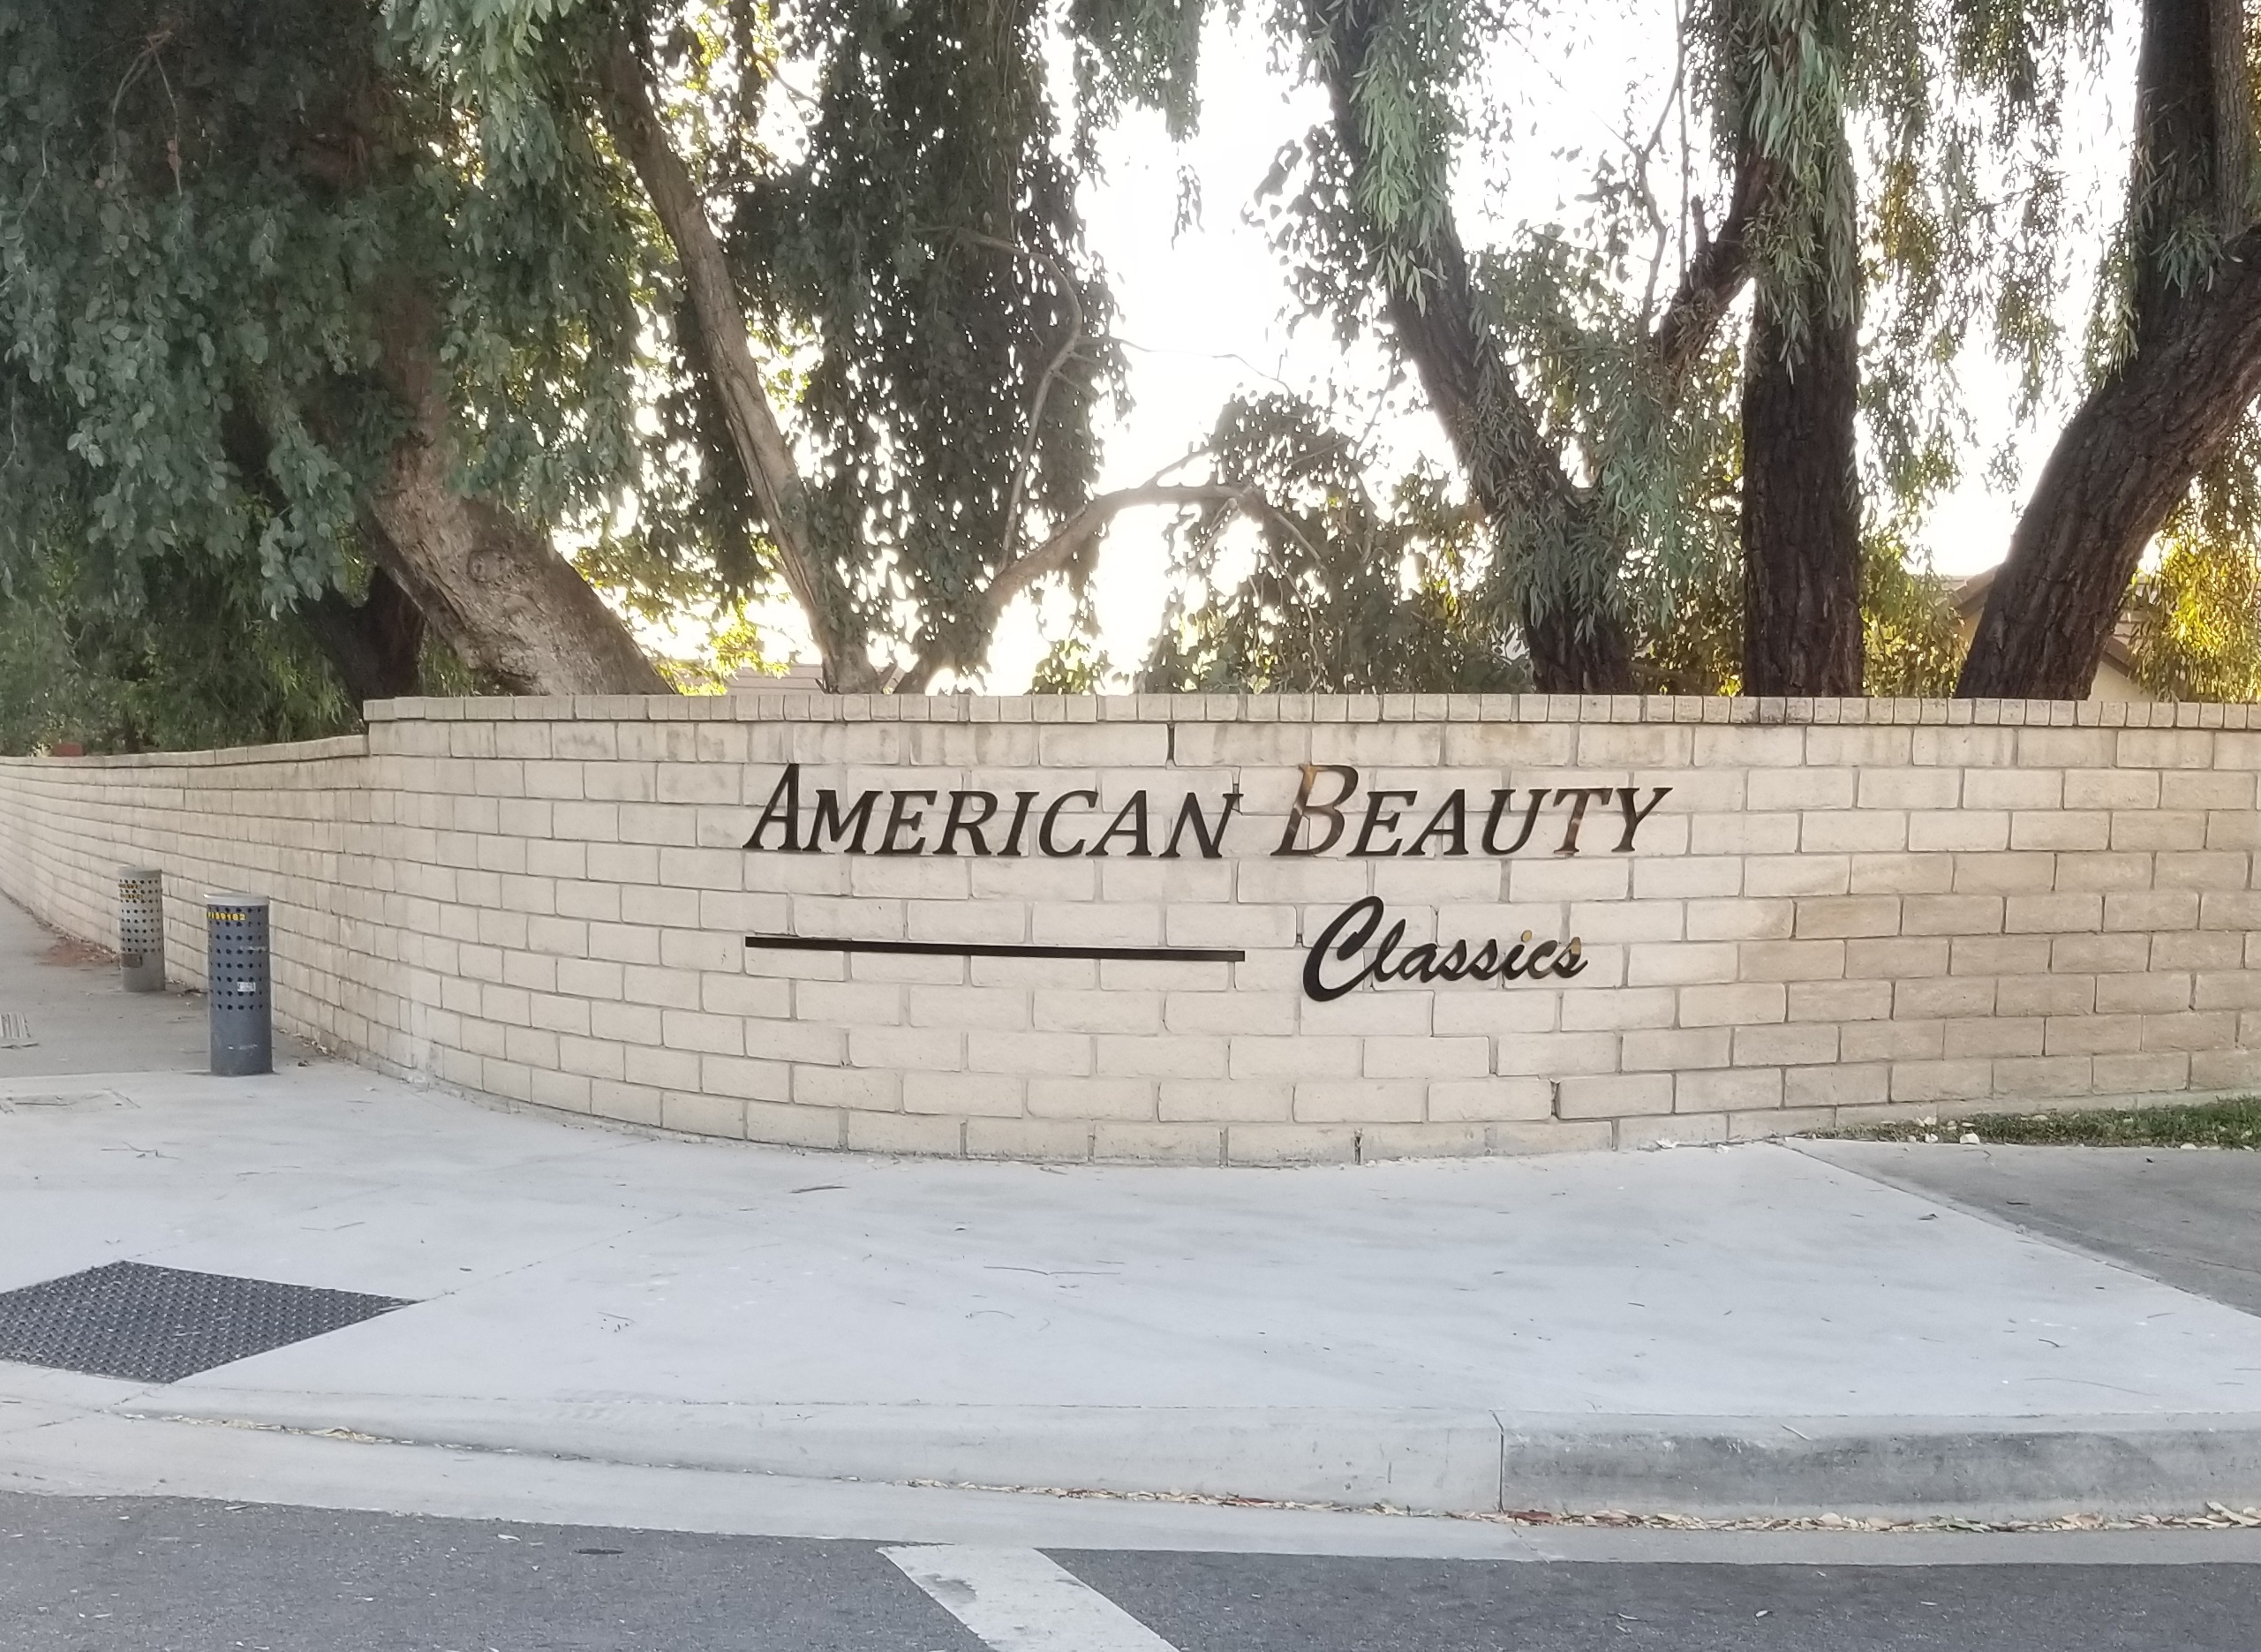 These are the extra streetside dimensional letters we made for American Beauty Classics in Canyon Country.